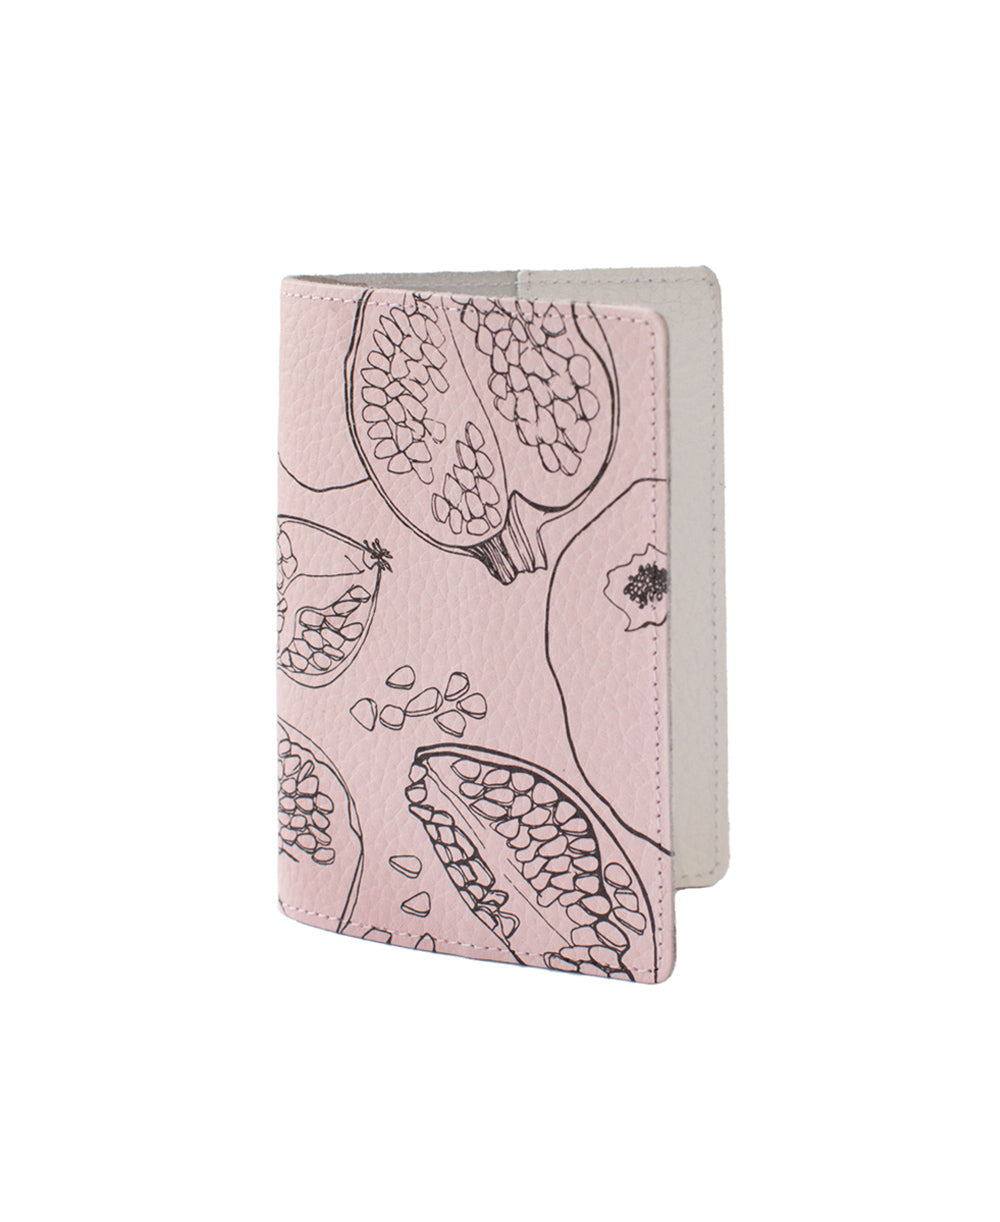 Printed Pomegranate Leather Passport Cover